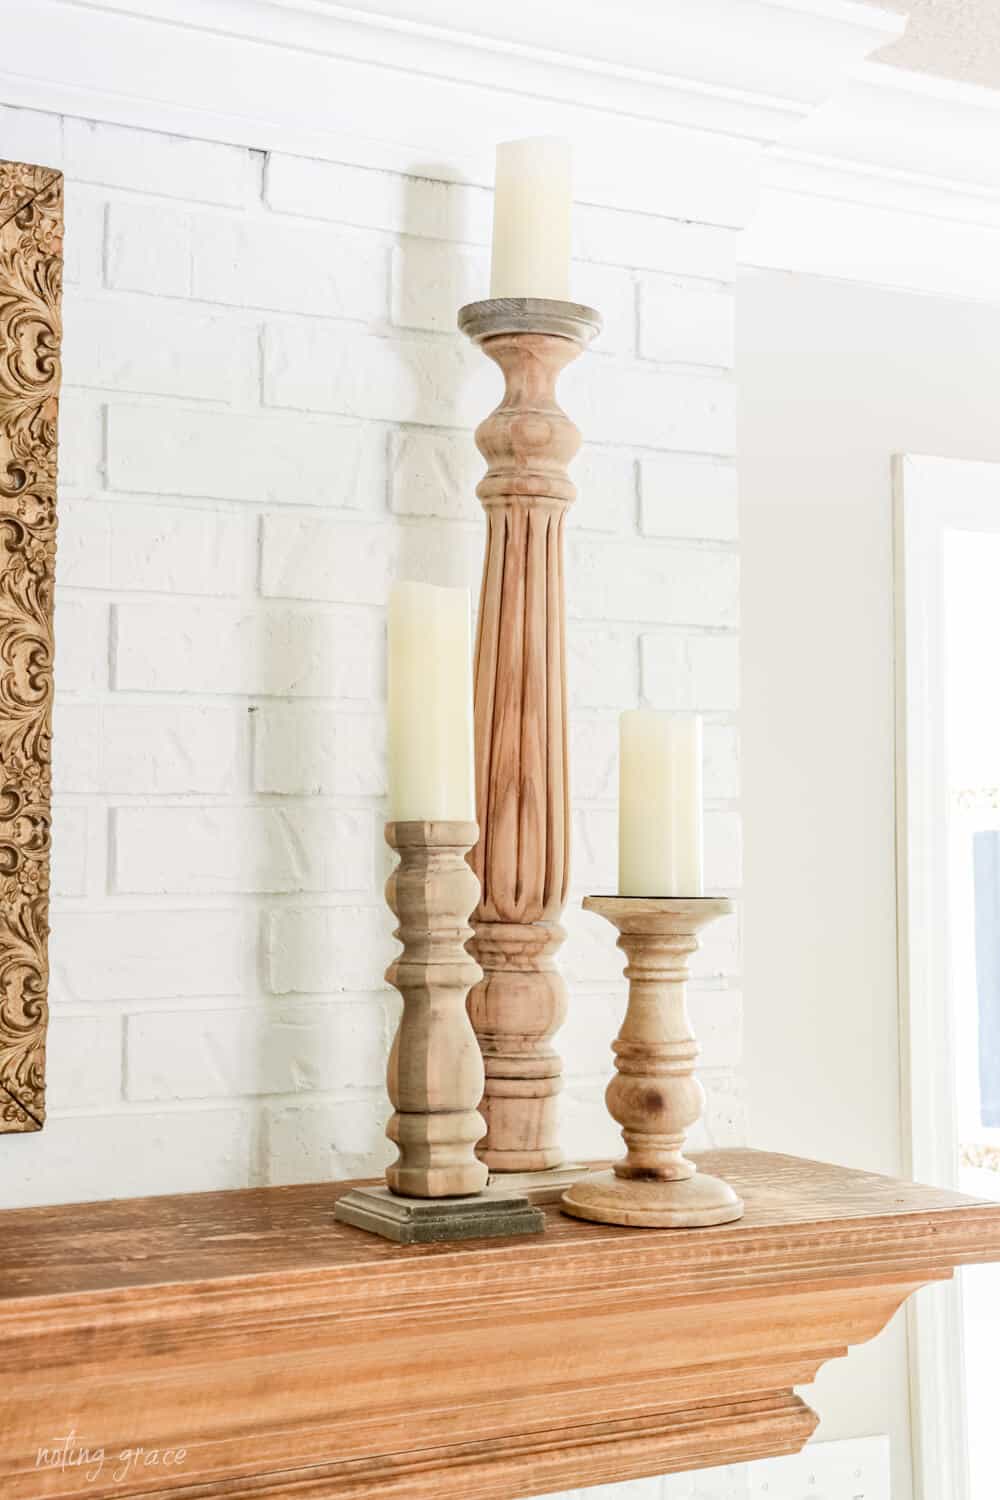 DIY candlesticks made from bedposts displayed on a fireplace mantel